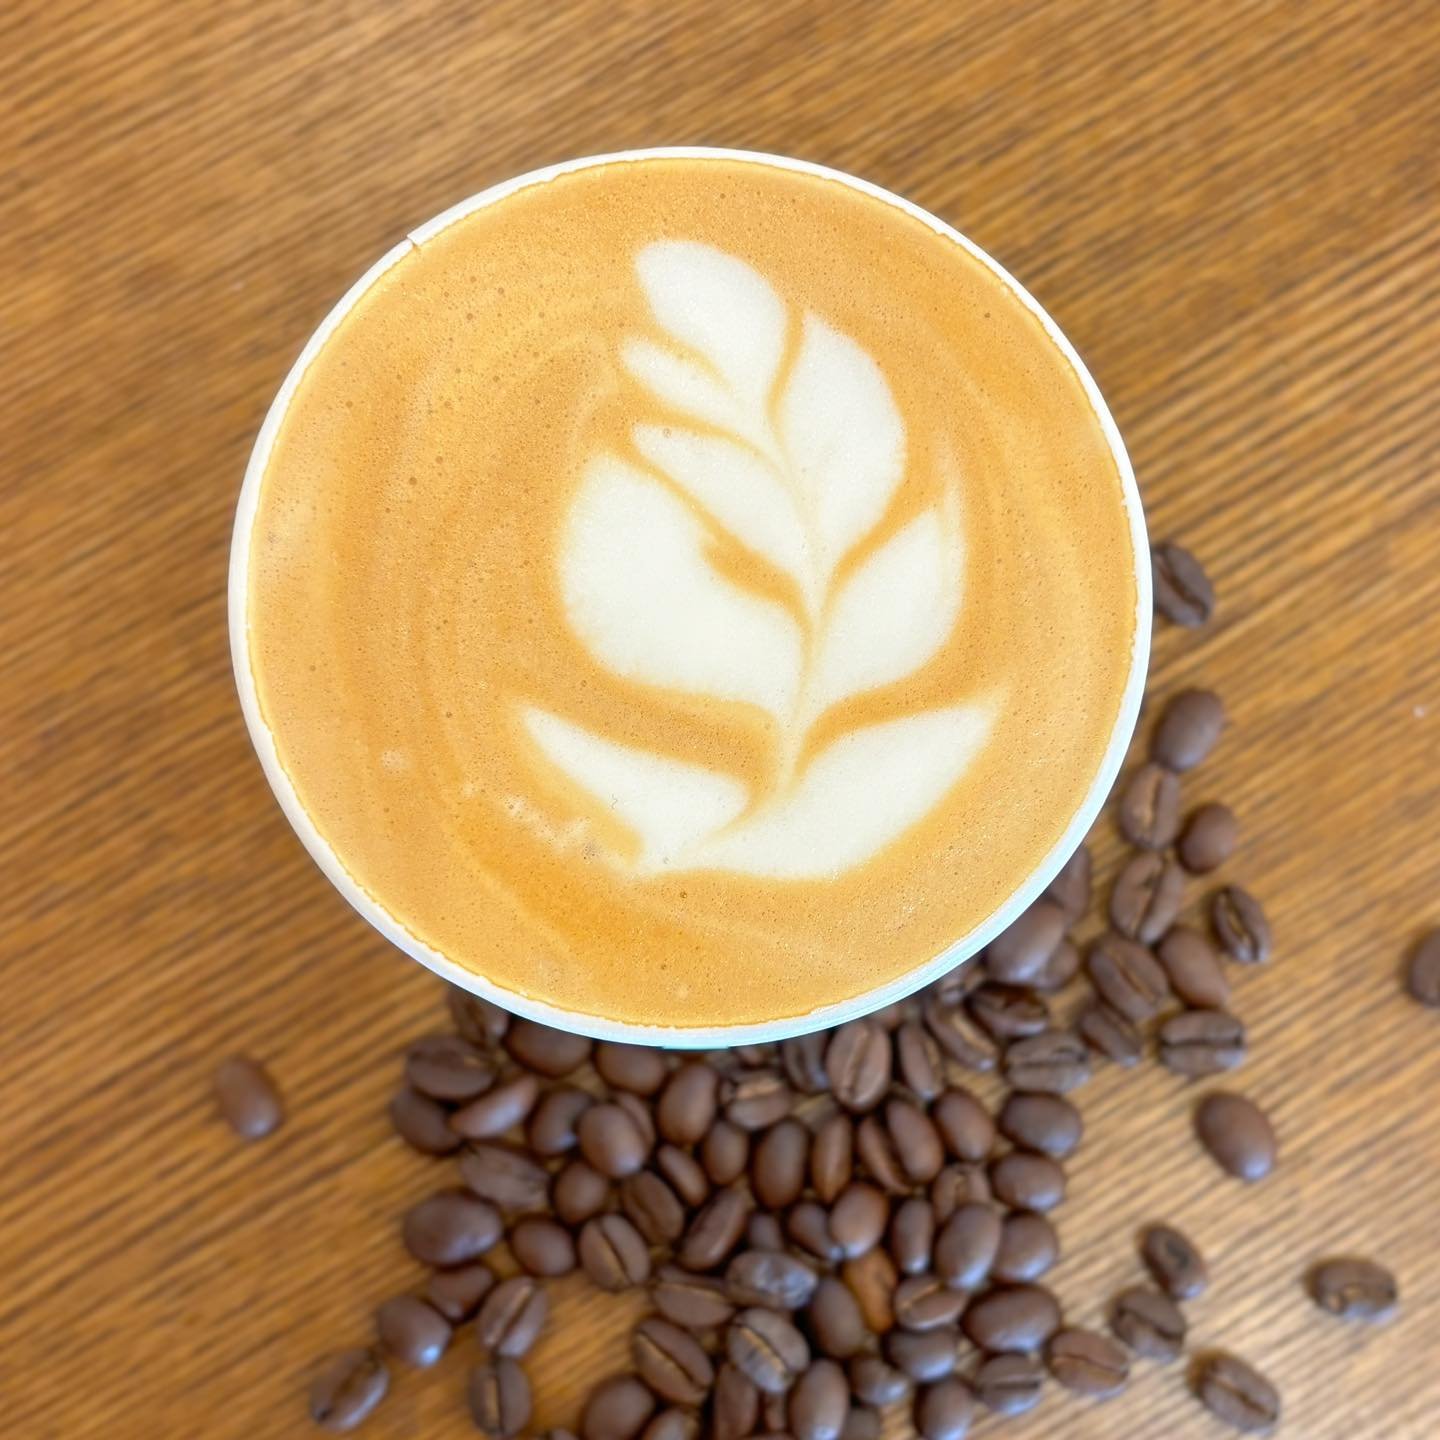 From lattes to drip, all the delicious coffee we brew is made with Nimbus Coffee Roasters beans ☕️

Nimbus is a local roaster in Longmont, and they supply us with their top-notch beans, and we're proud to serve them to you! Swing on by and grab a dri